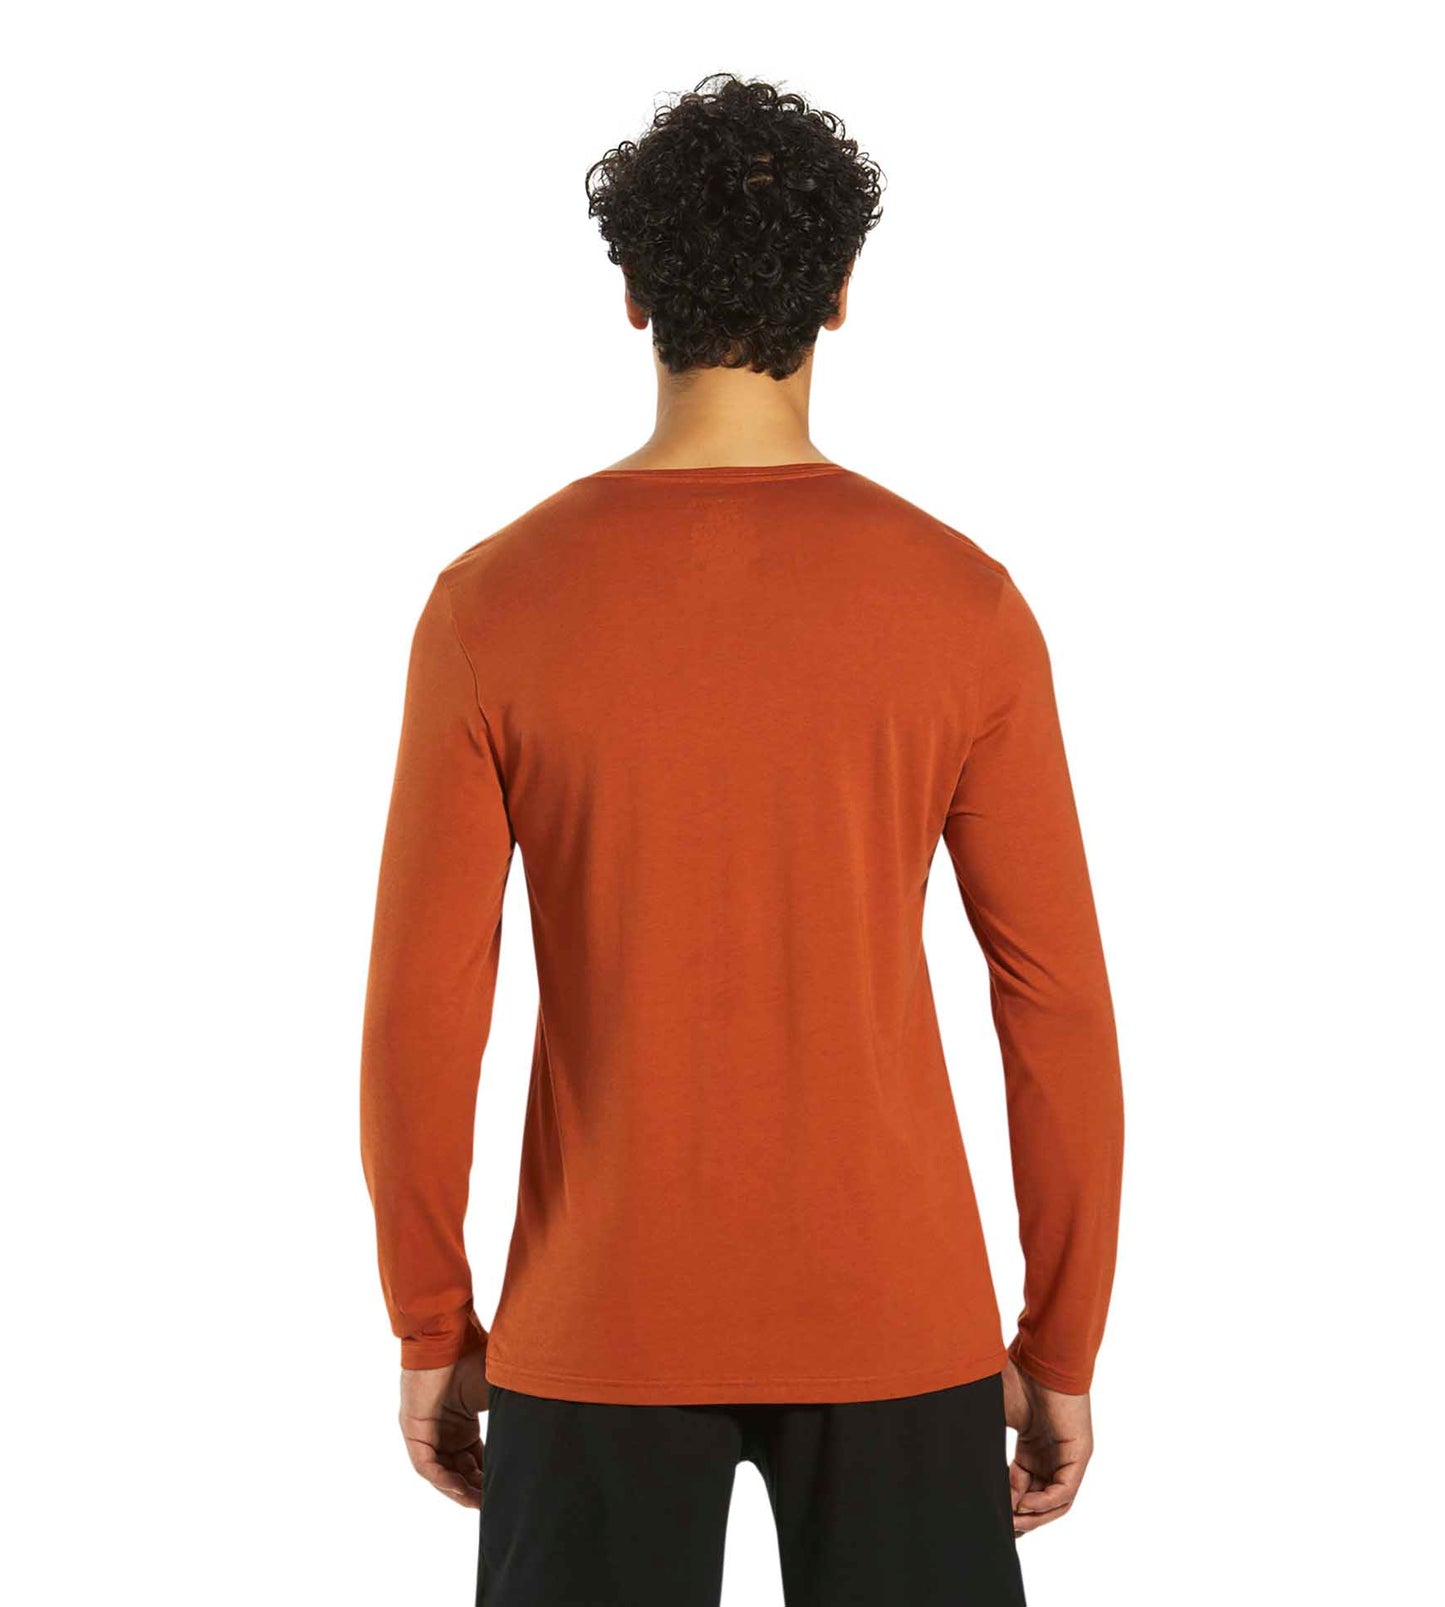 SuperSoft Long Sleeve Crew Neck Tee colors contain: Black, Sienna, Brown, Dark salmon, Saddle brown, Sienna, Indian red, Light Gray, Dark slate gray